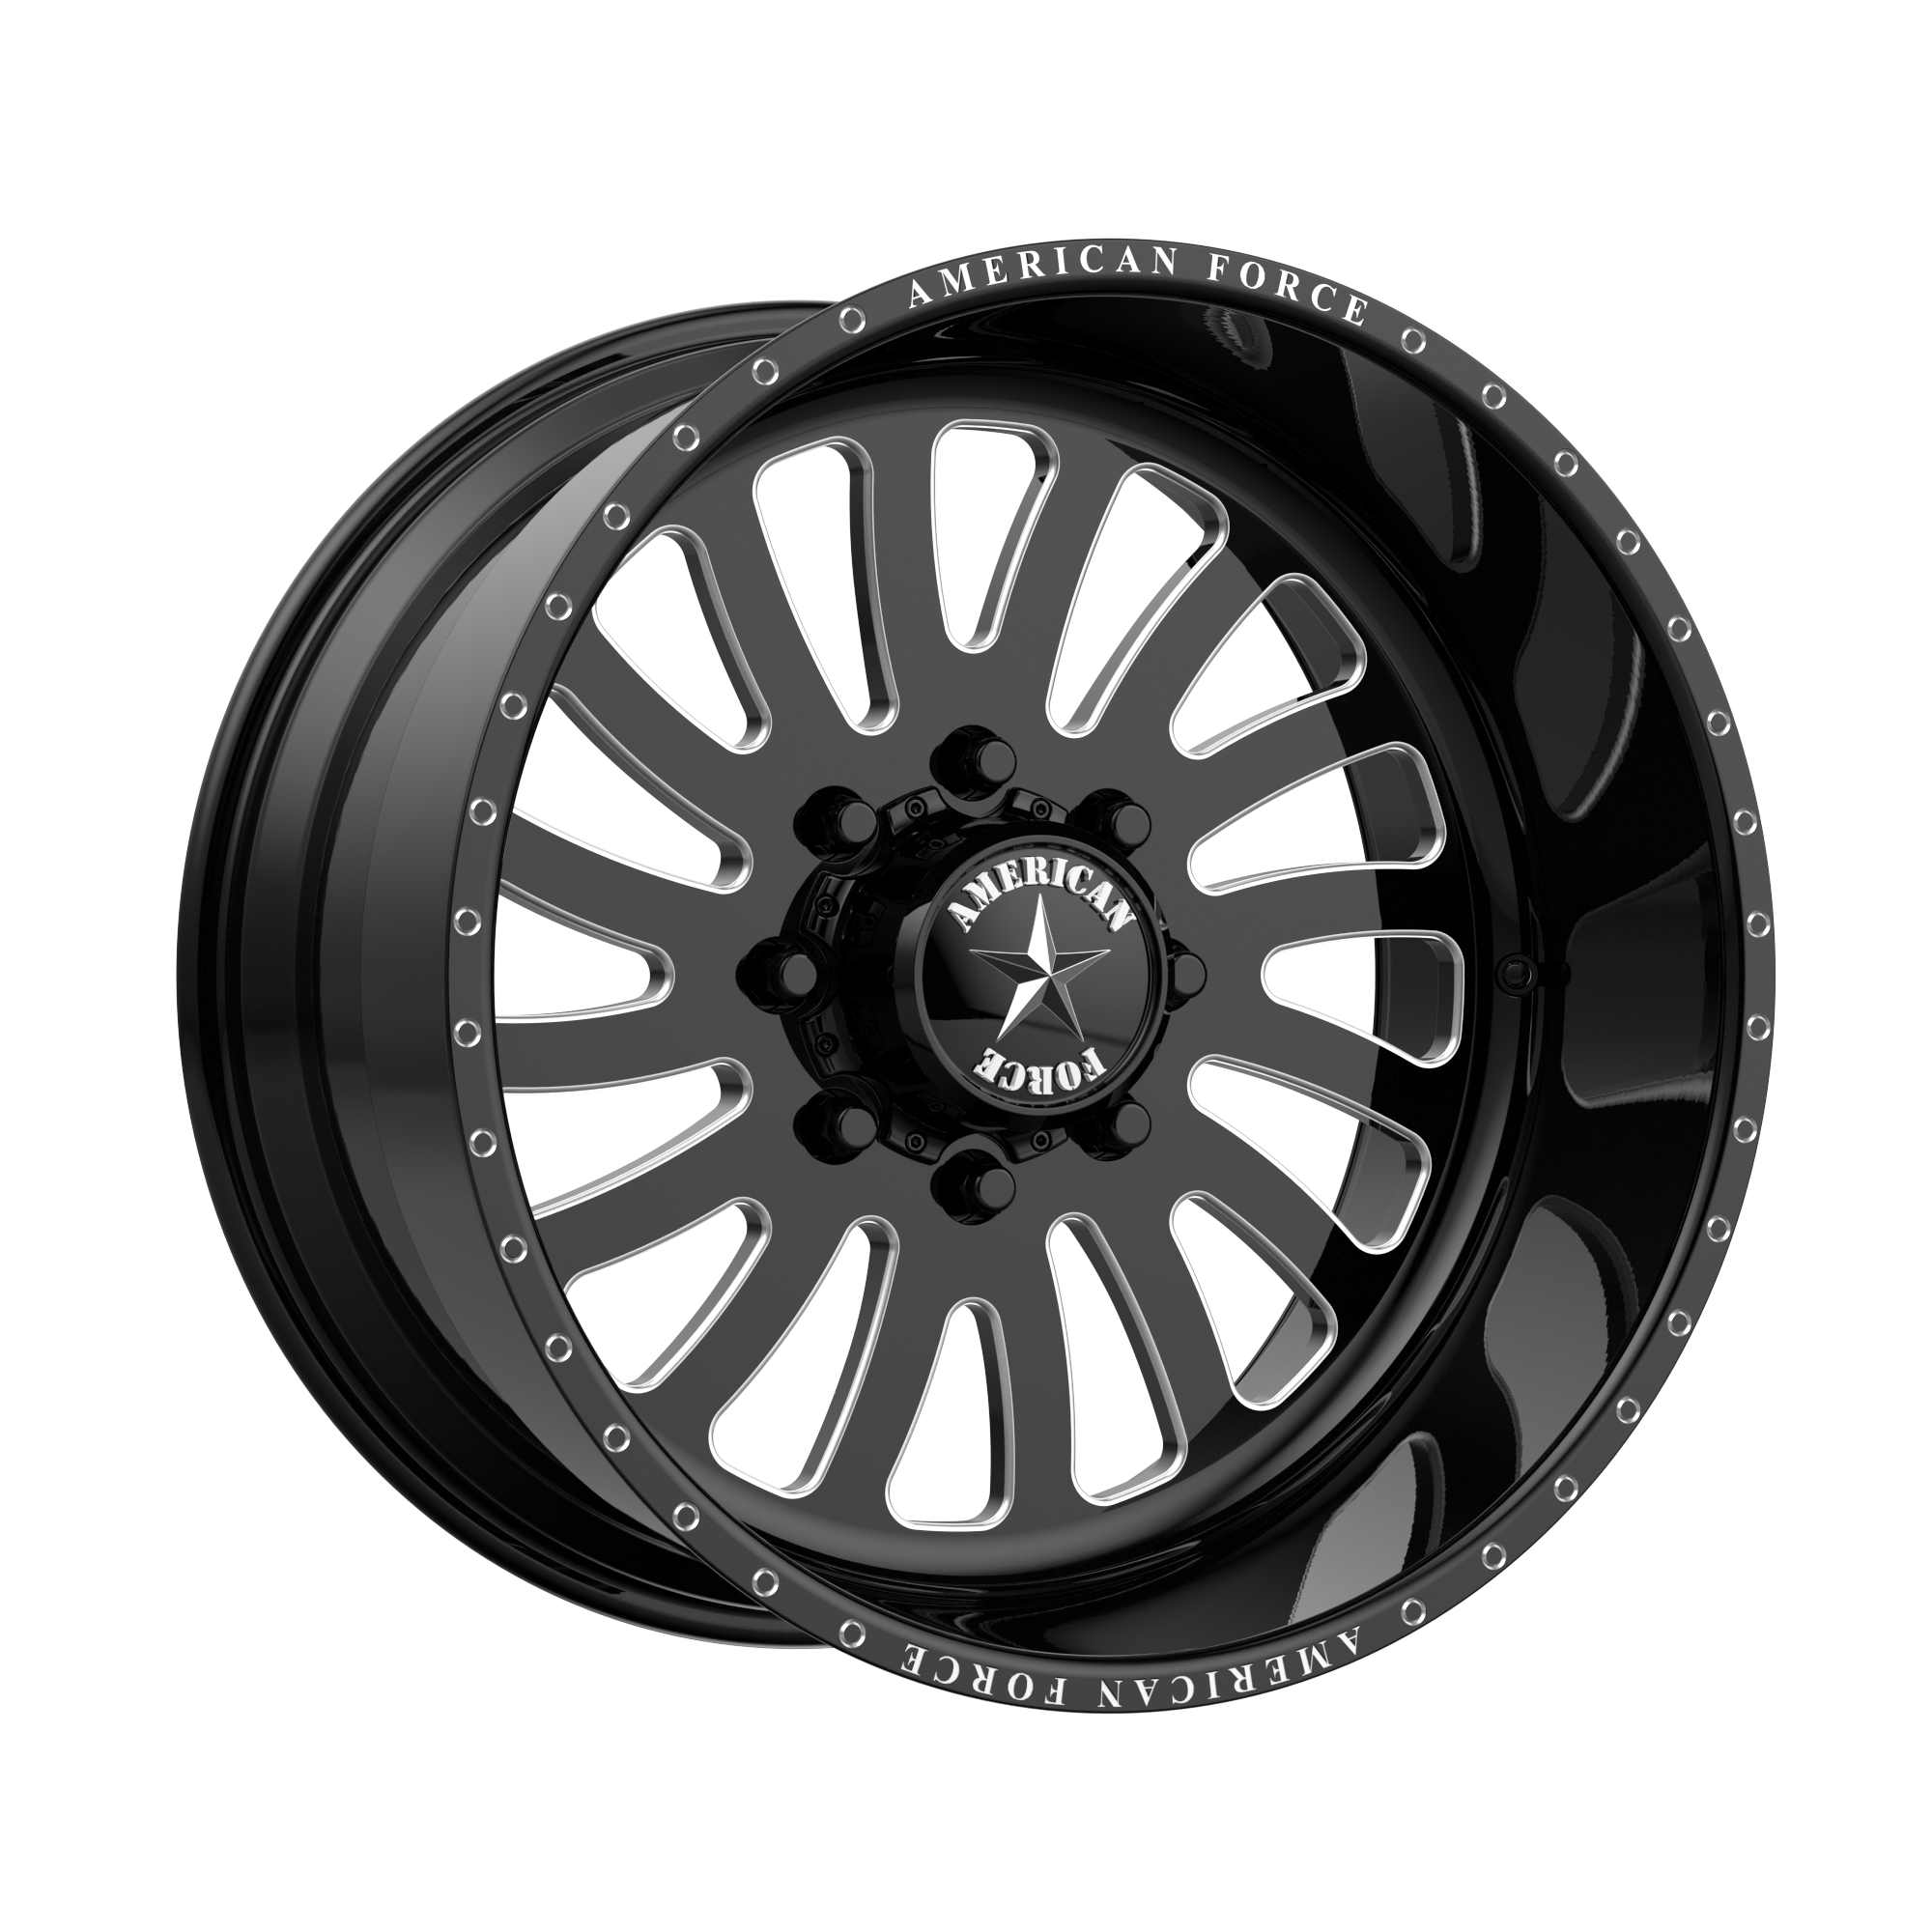 OCTANE SS 26x16 6x139.70 GLOSS BLACK MACHINED (-101 mm) - Tires and Engine Performance